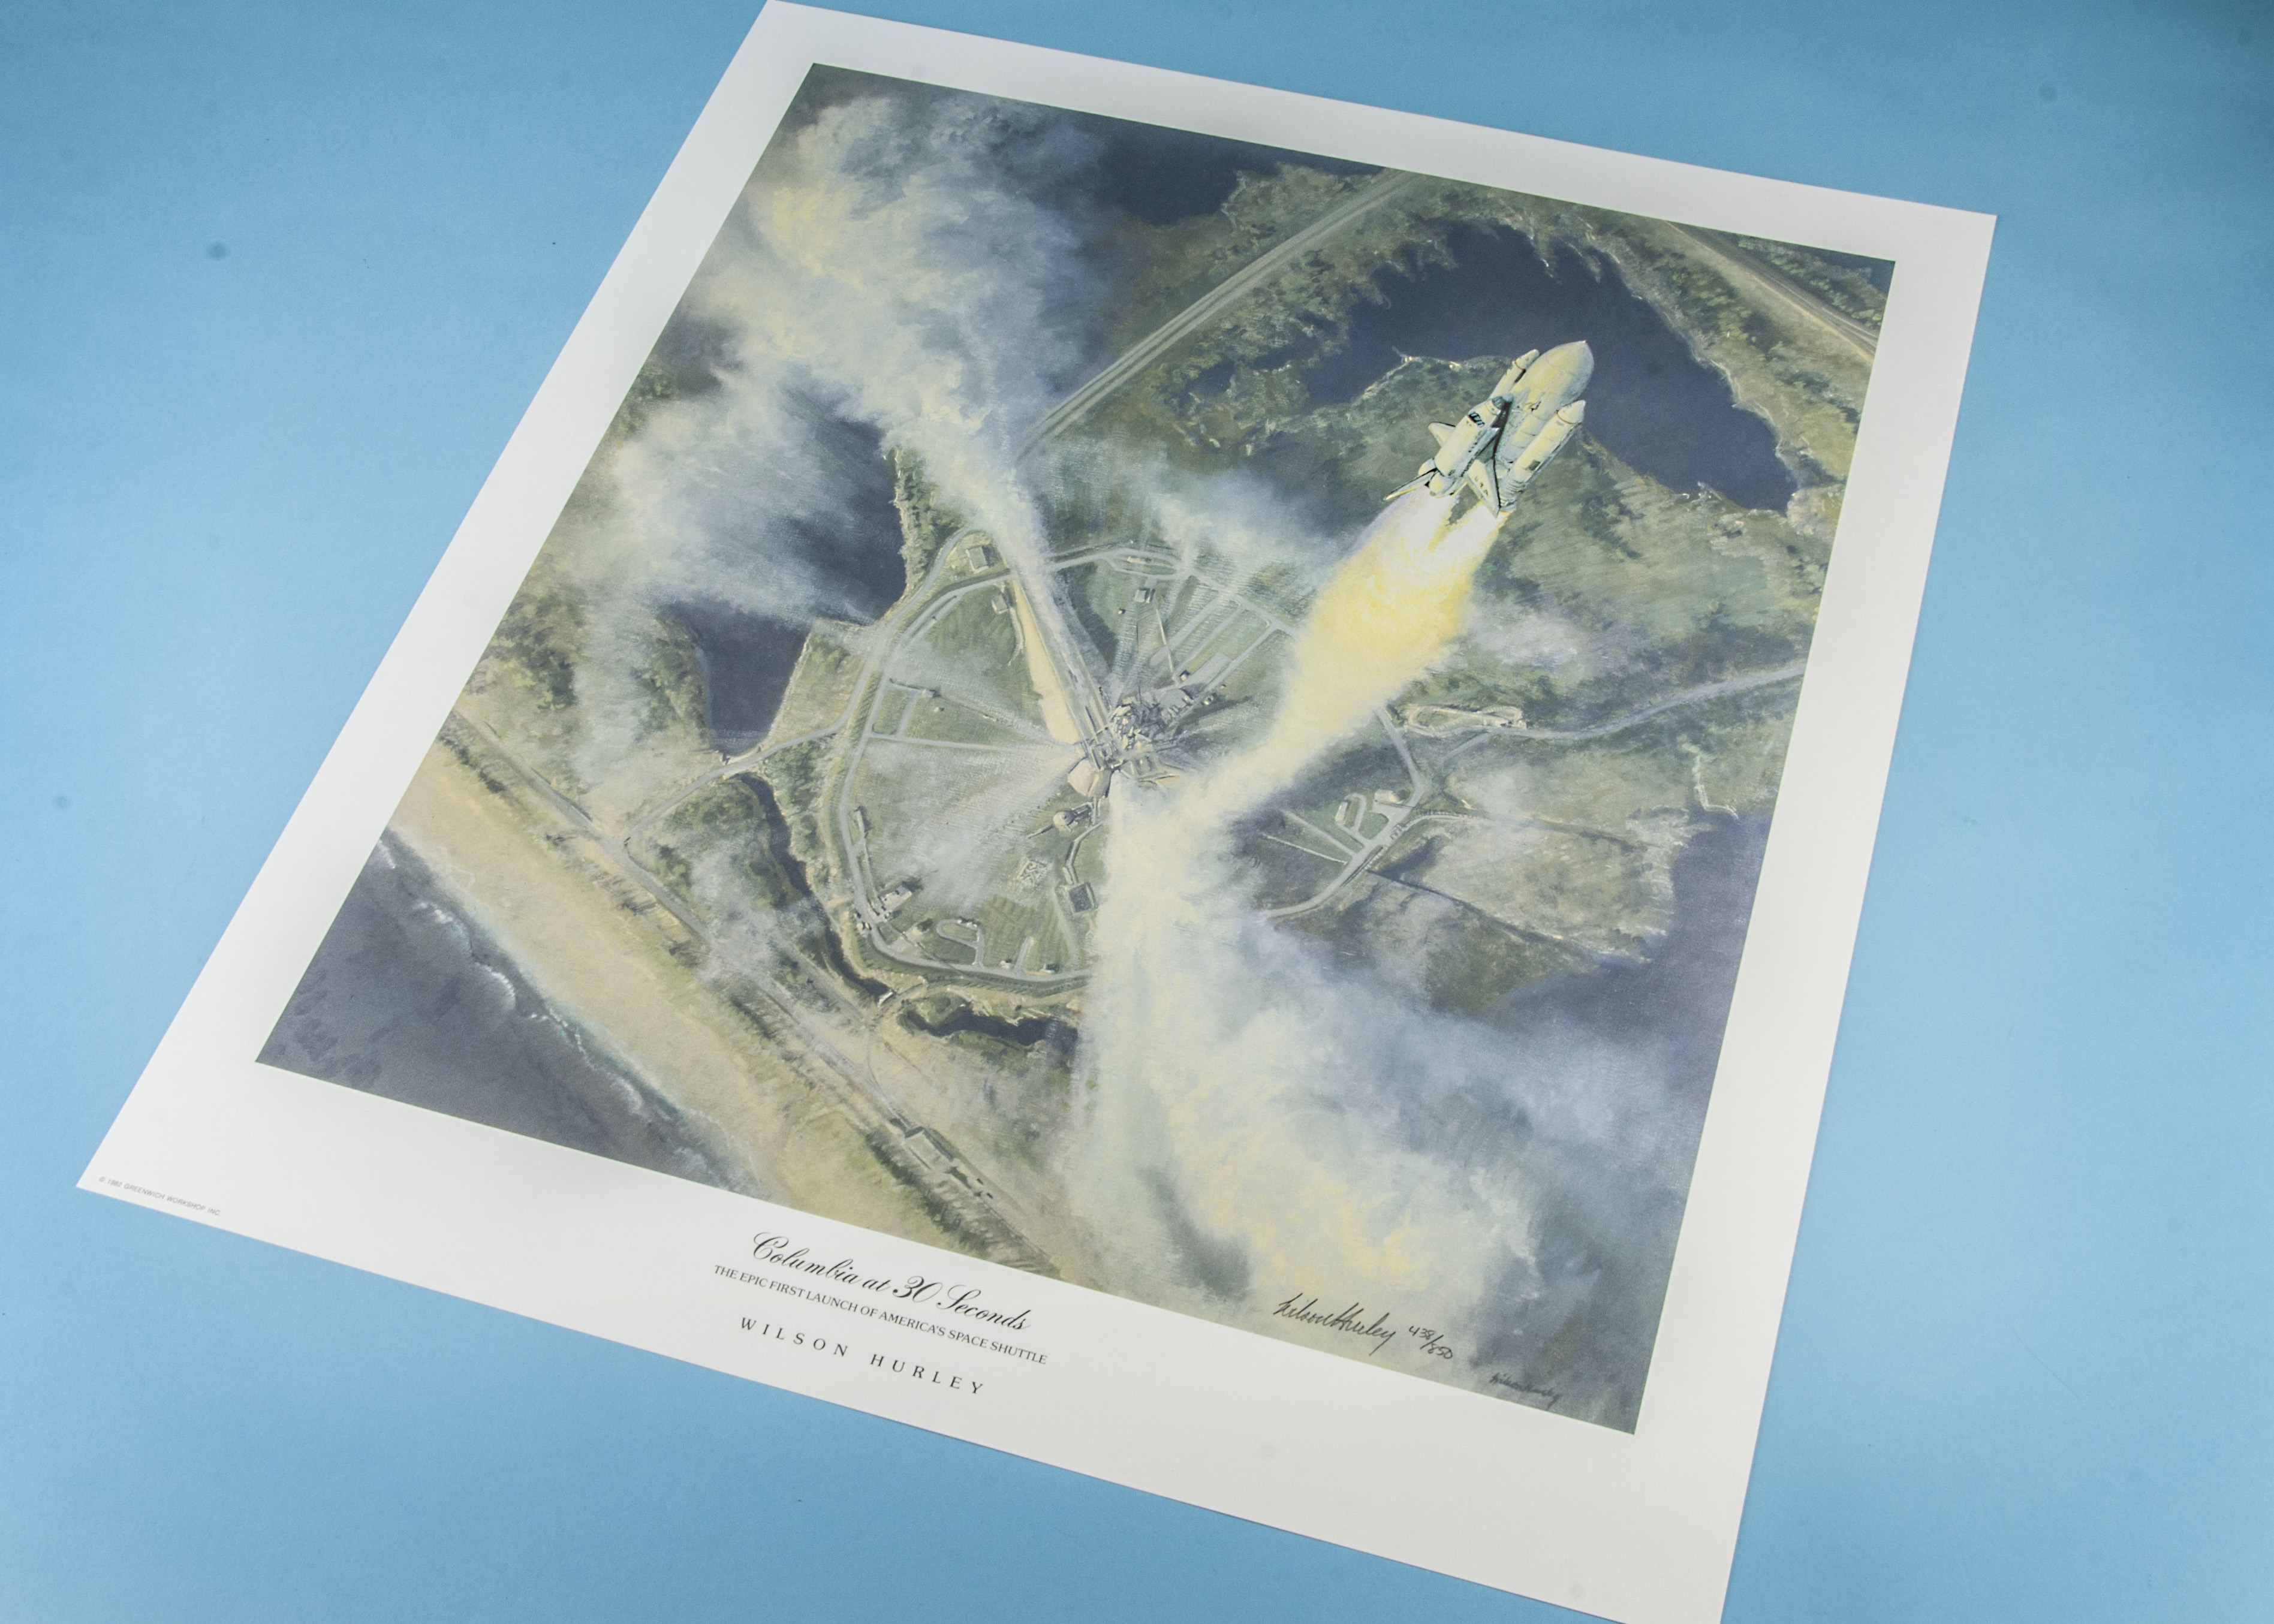 An unframed limited edition print after Wilson Hurley, Columbia in 3 Seconds' - The First Launch